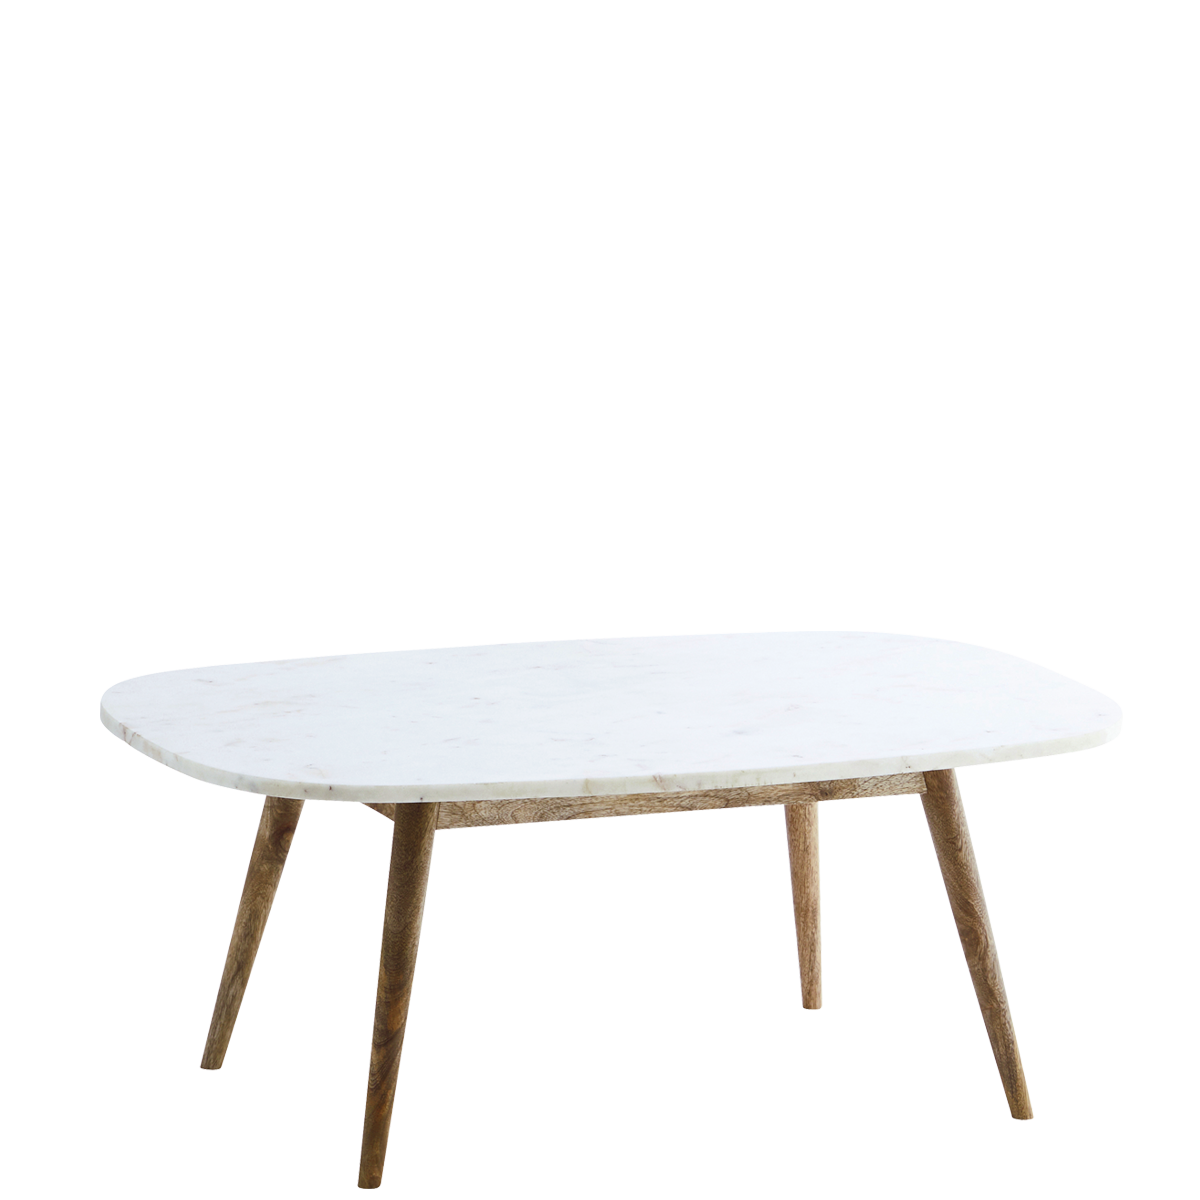 Marble coffee table w/ wooden legs